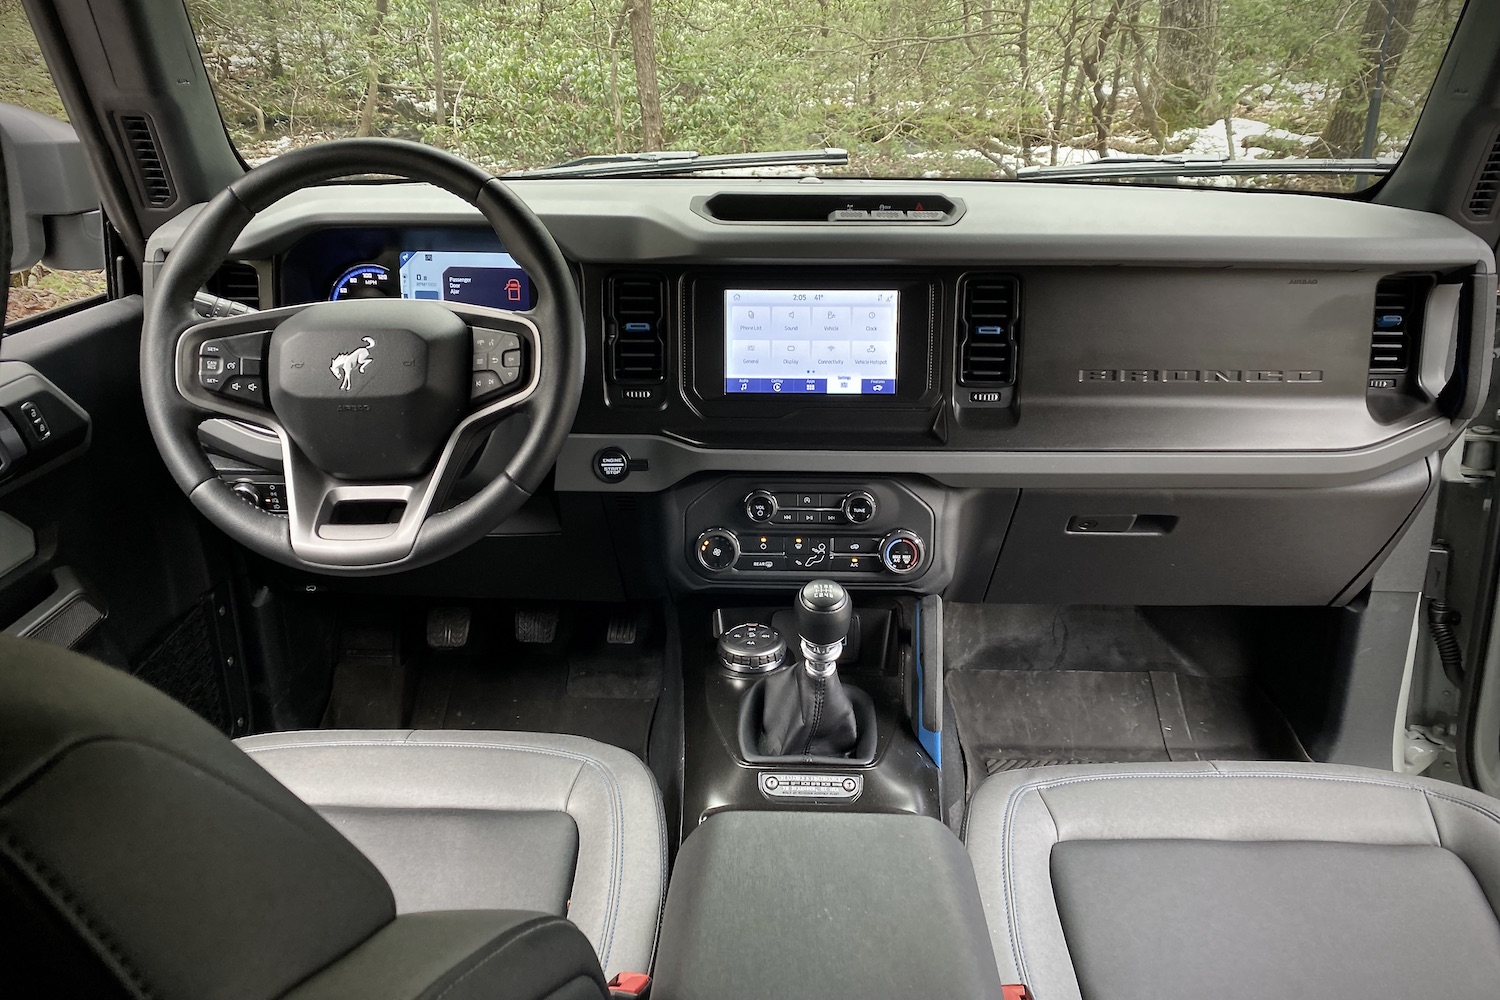 Steering wheel, dashboard, and center console in the 2021 Ford Bronco from the back seats with trees in the back.